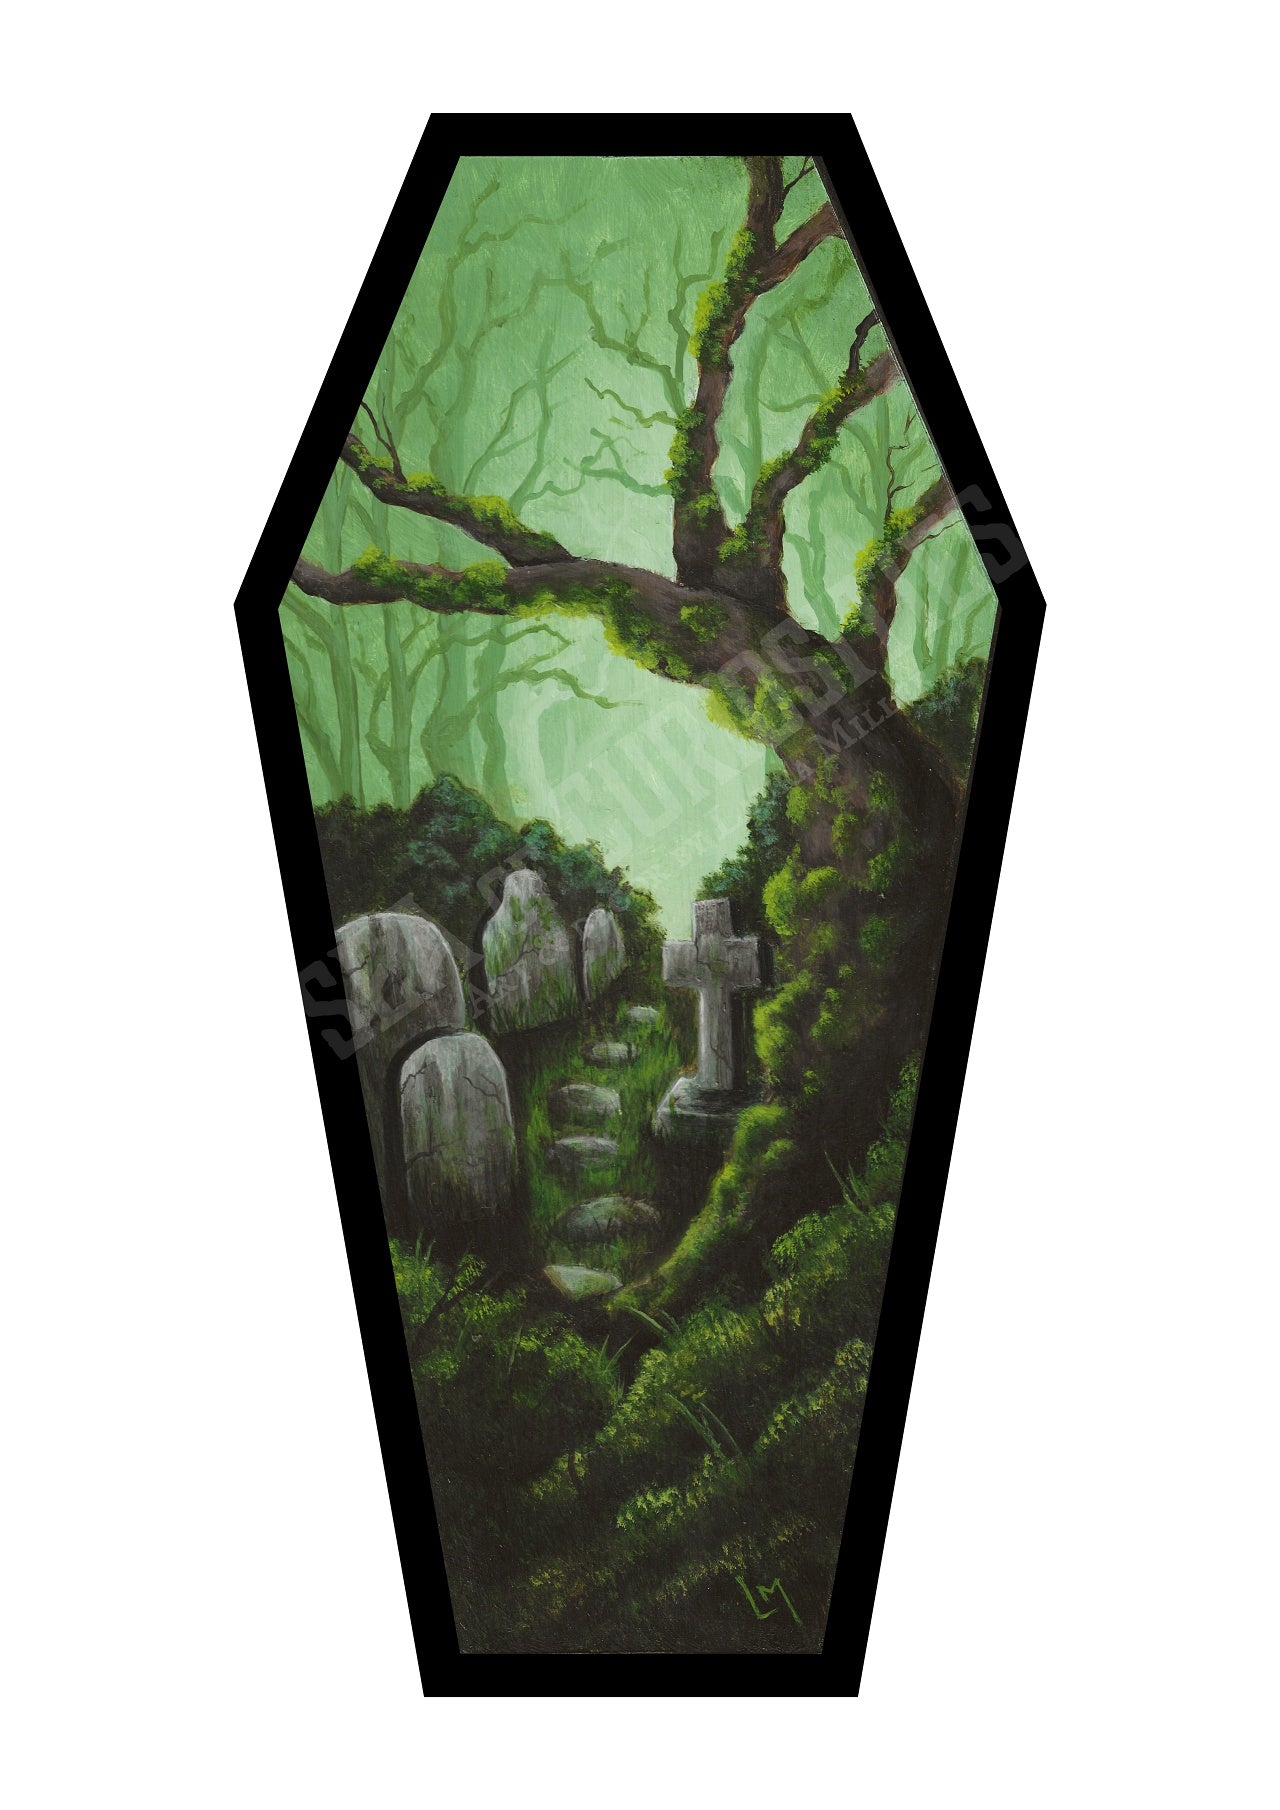 Verdant veil of lost remembrance - Forgotten Tombs series - Coffin Shaped Bookmark